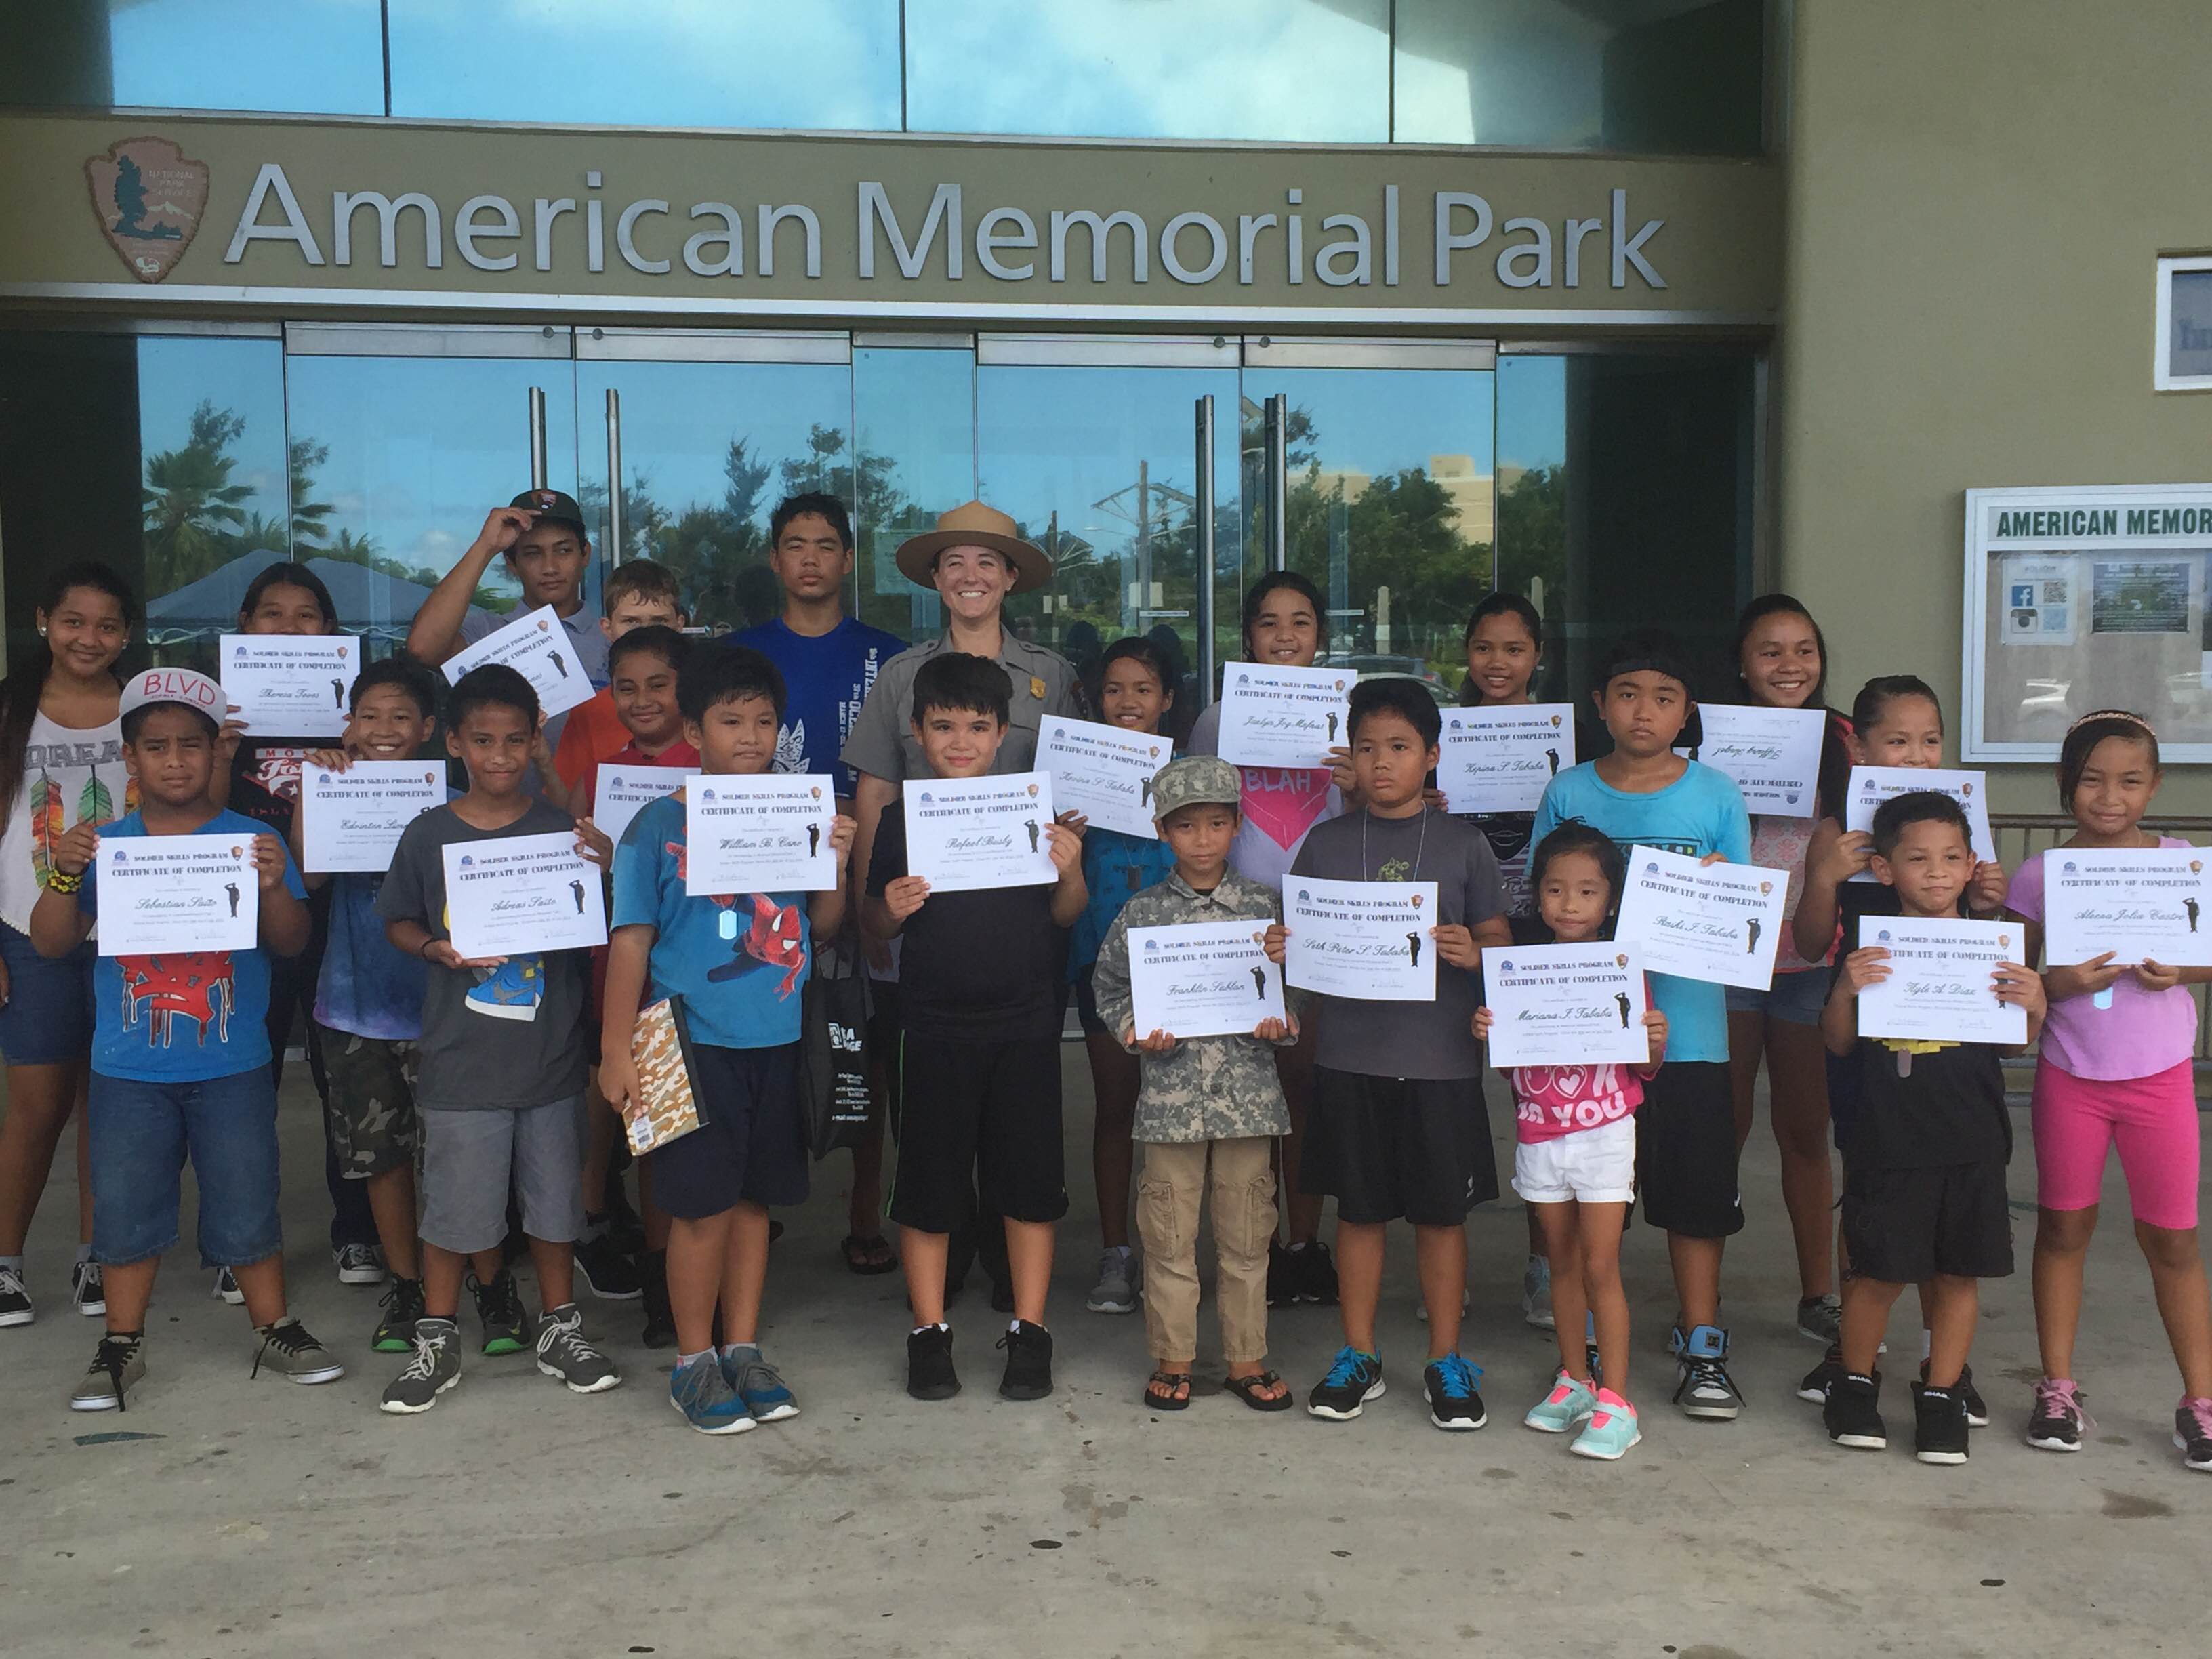 Group of youth at American Memorial Park